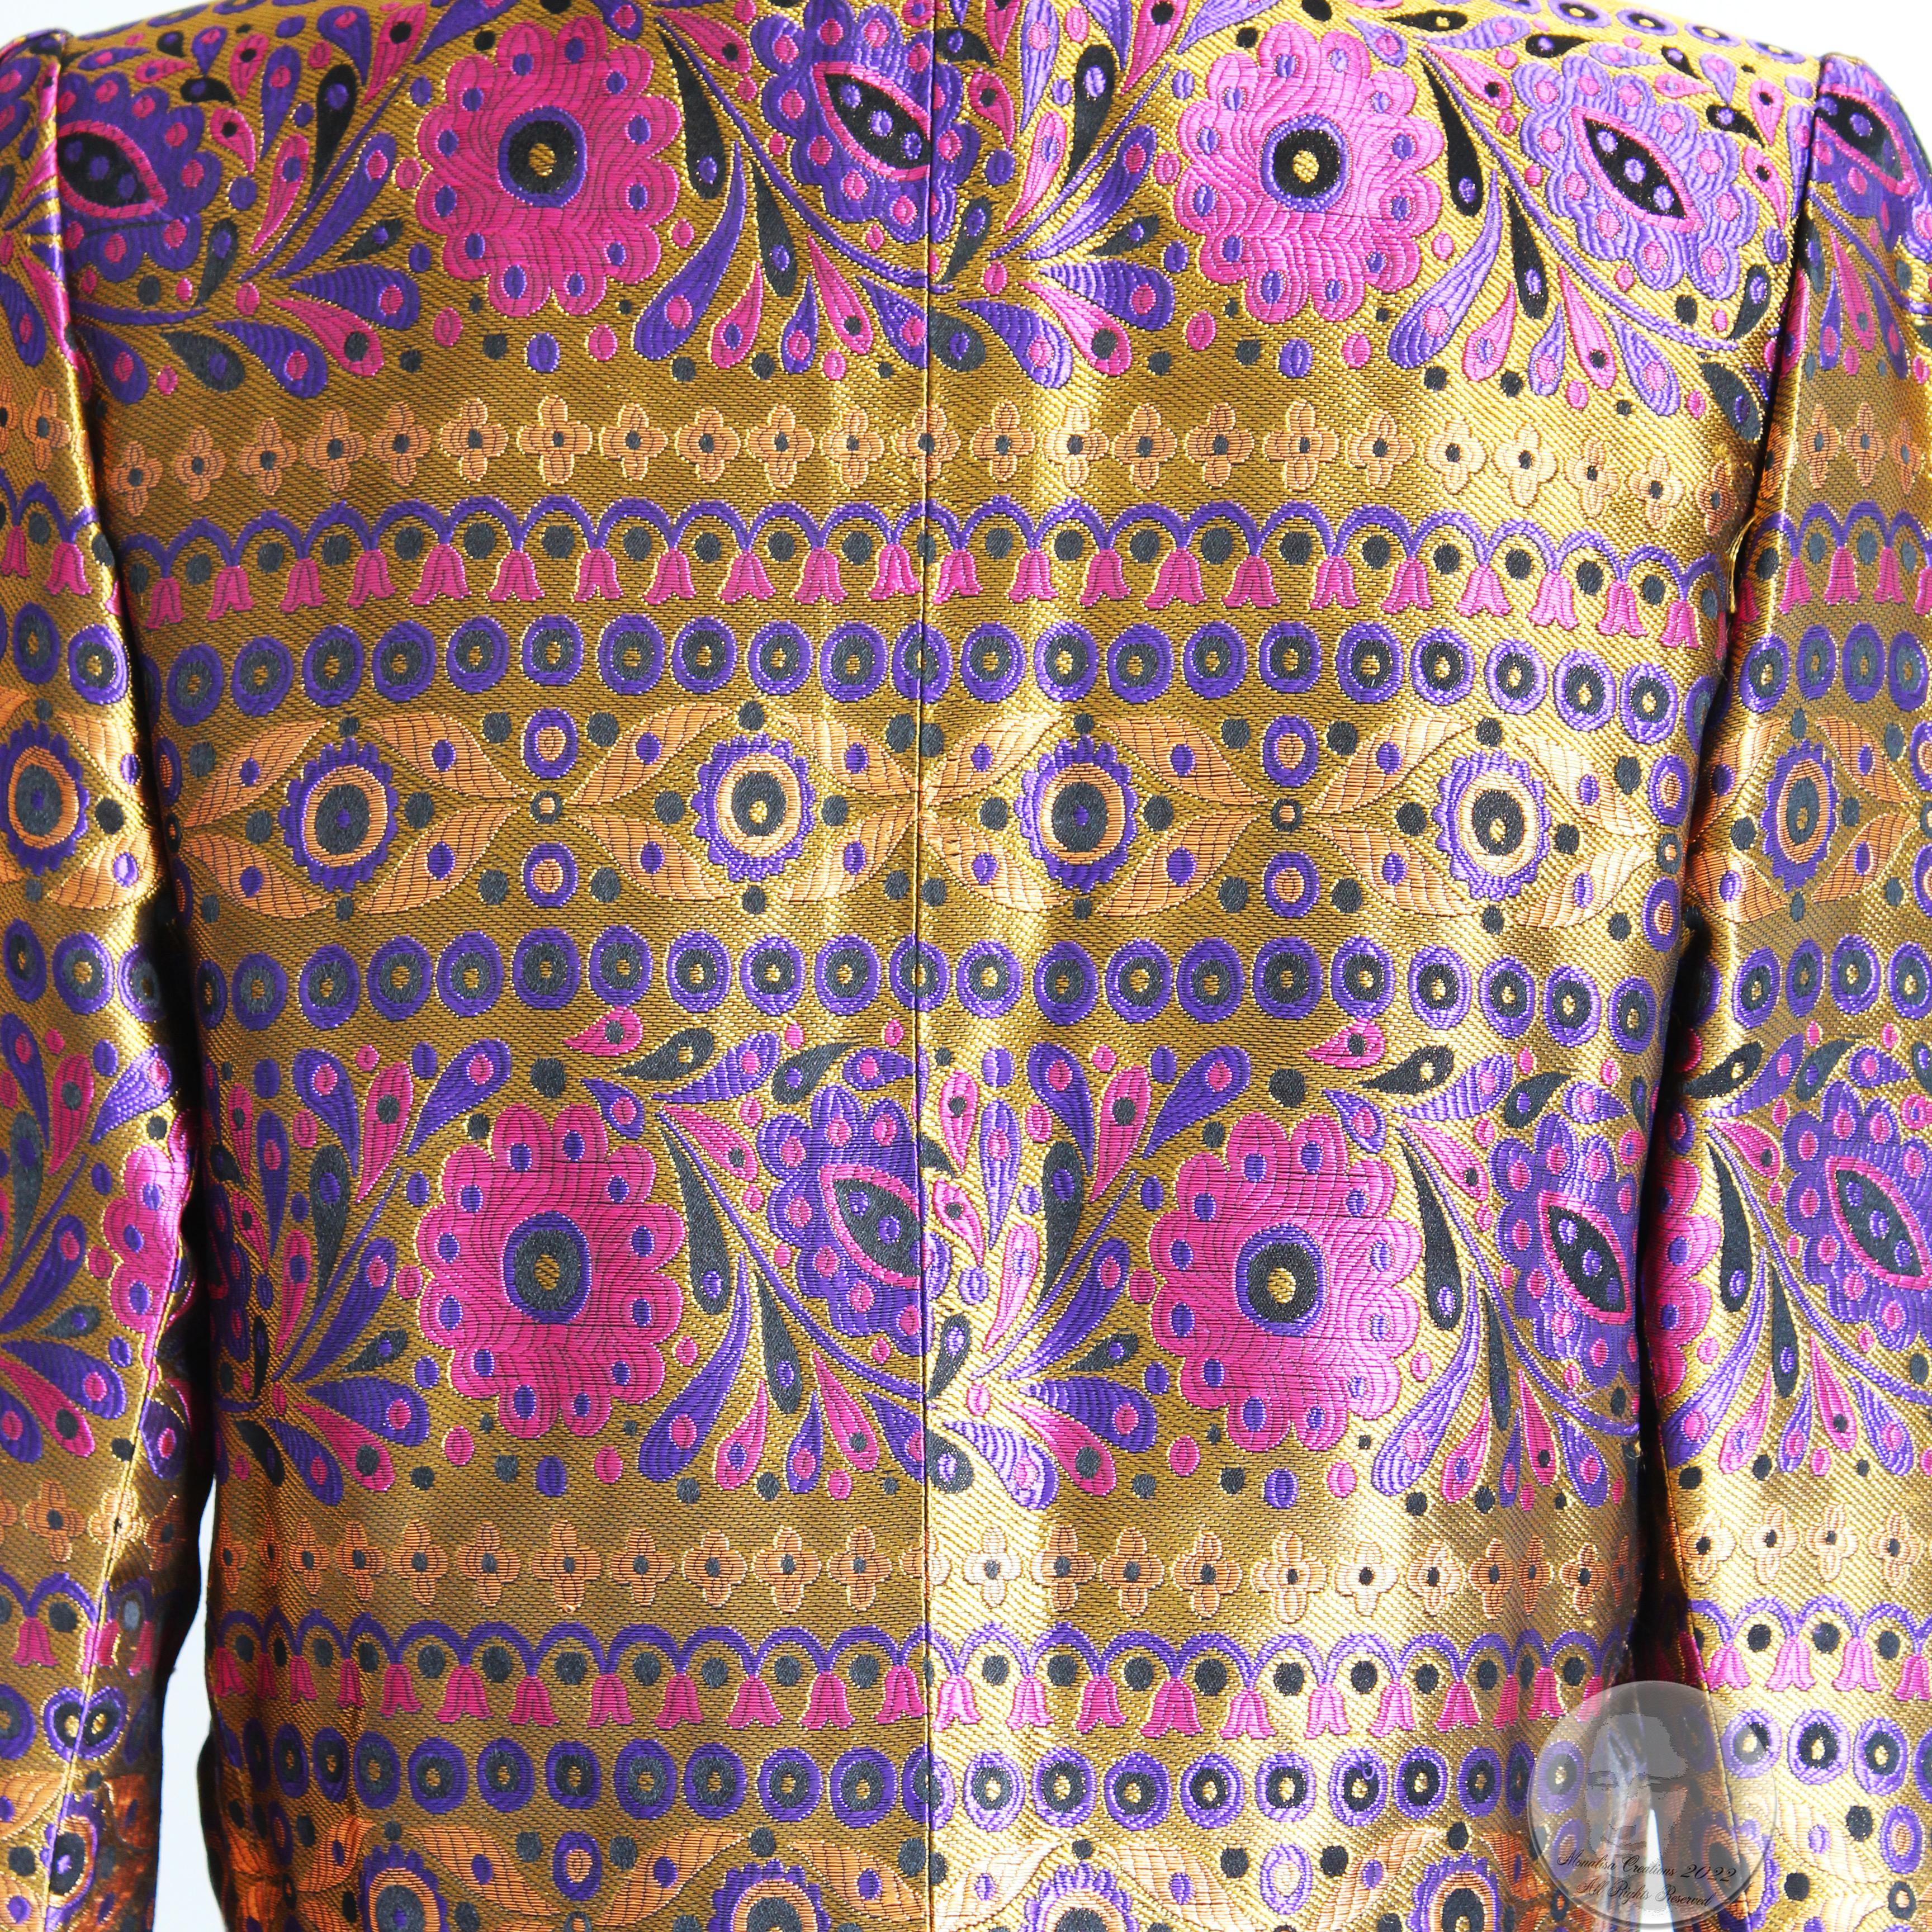 Yves Saint Laurent Jacket Silk Brocade with Embellished Buttons F/W 1991 Runway  7